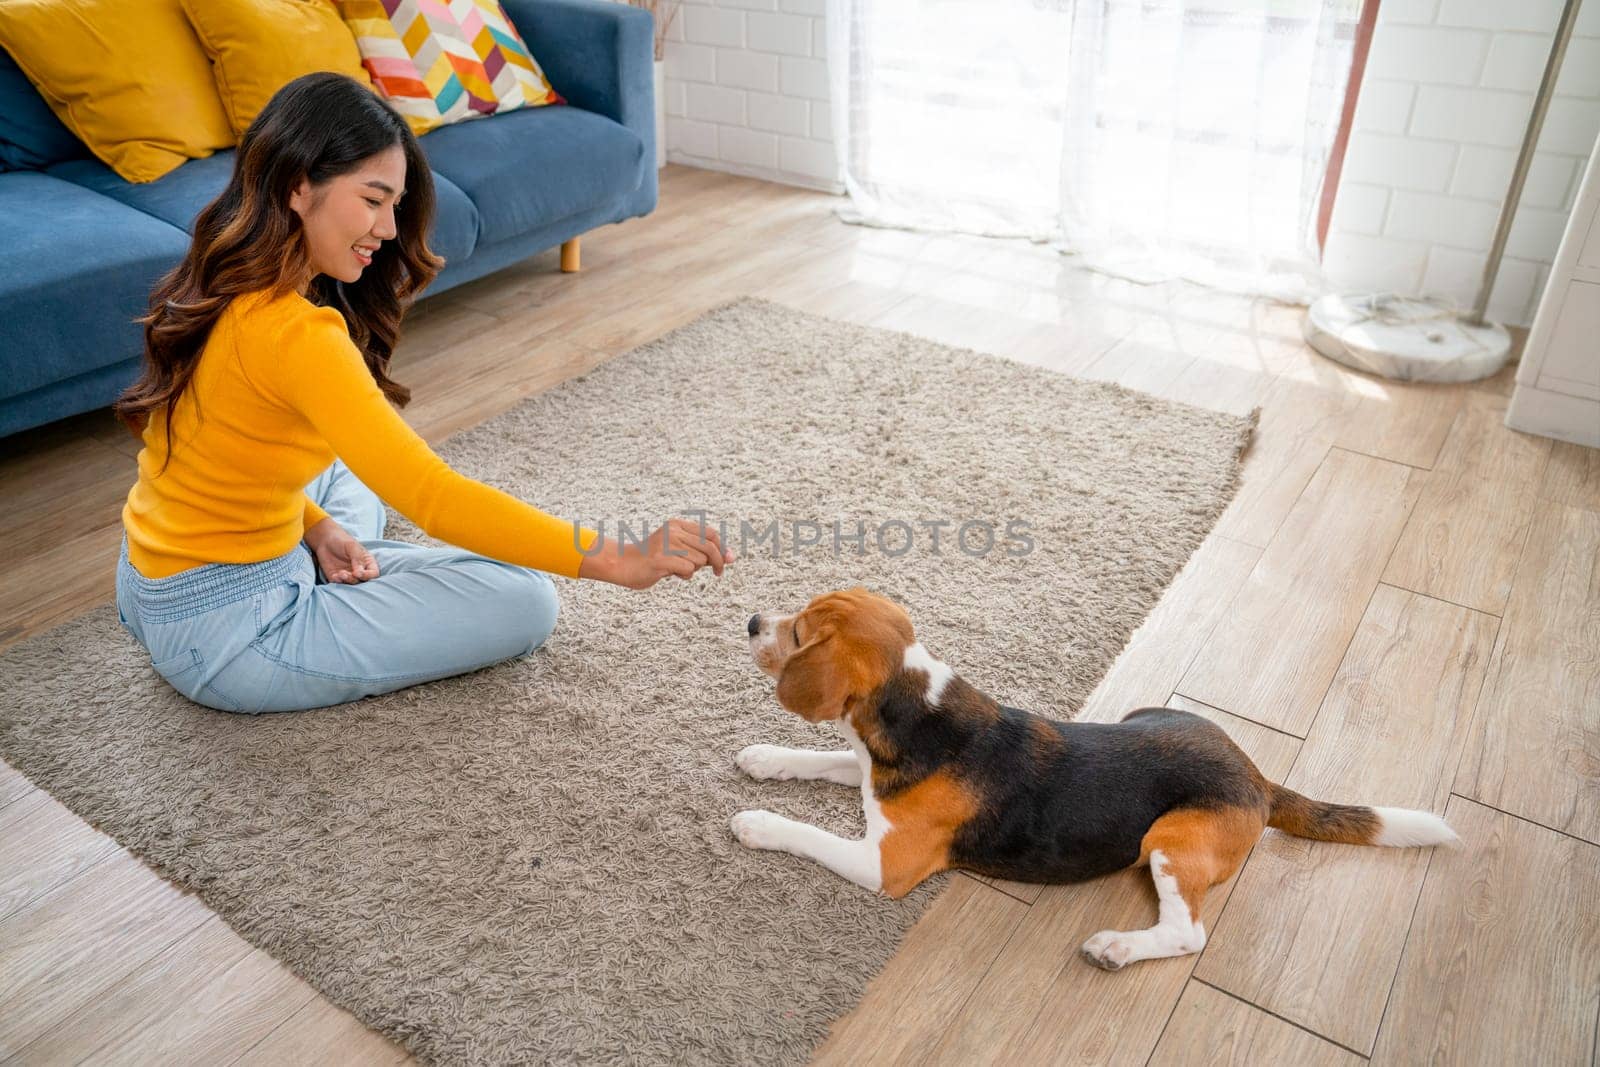 Young Asian girl fun and enjoy to play with beagle dog in living room of her house by give some candy or dog food to the dog. by nrradmin